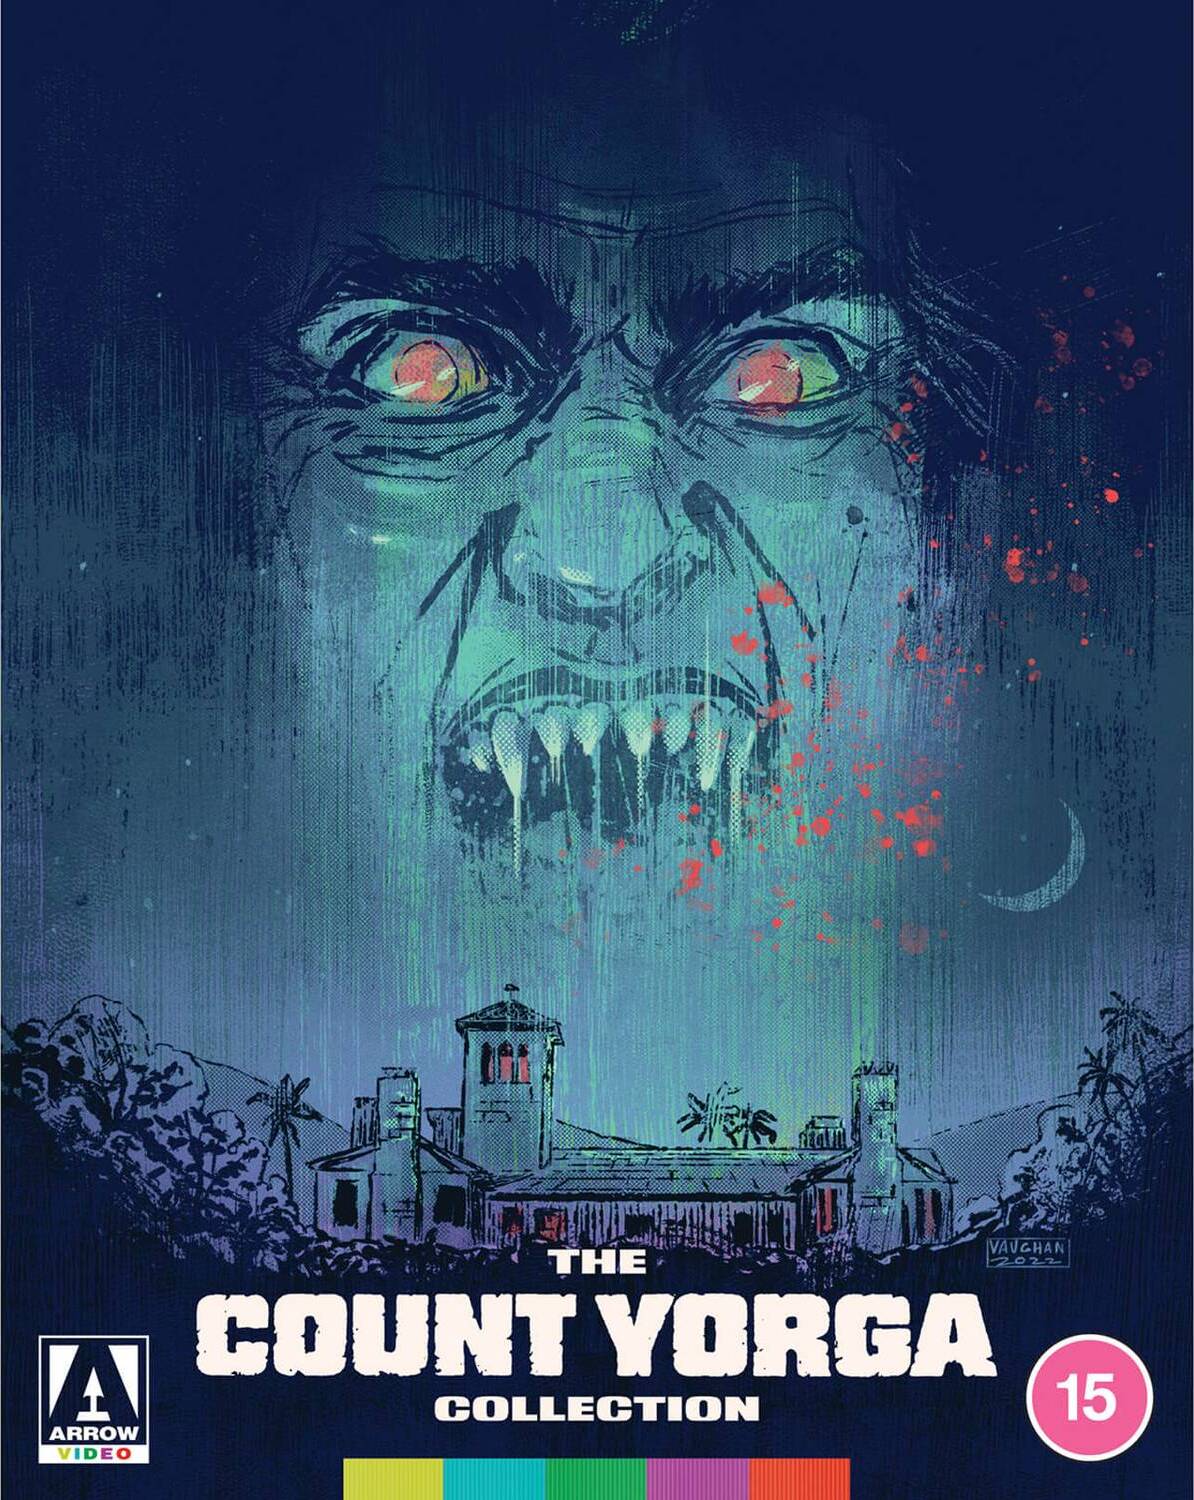 THE COUNT YORGA COLLECTION (REGION B IMPORT - LIMITED EDITION) BLU-RAY